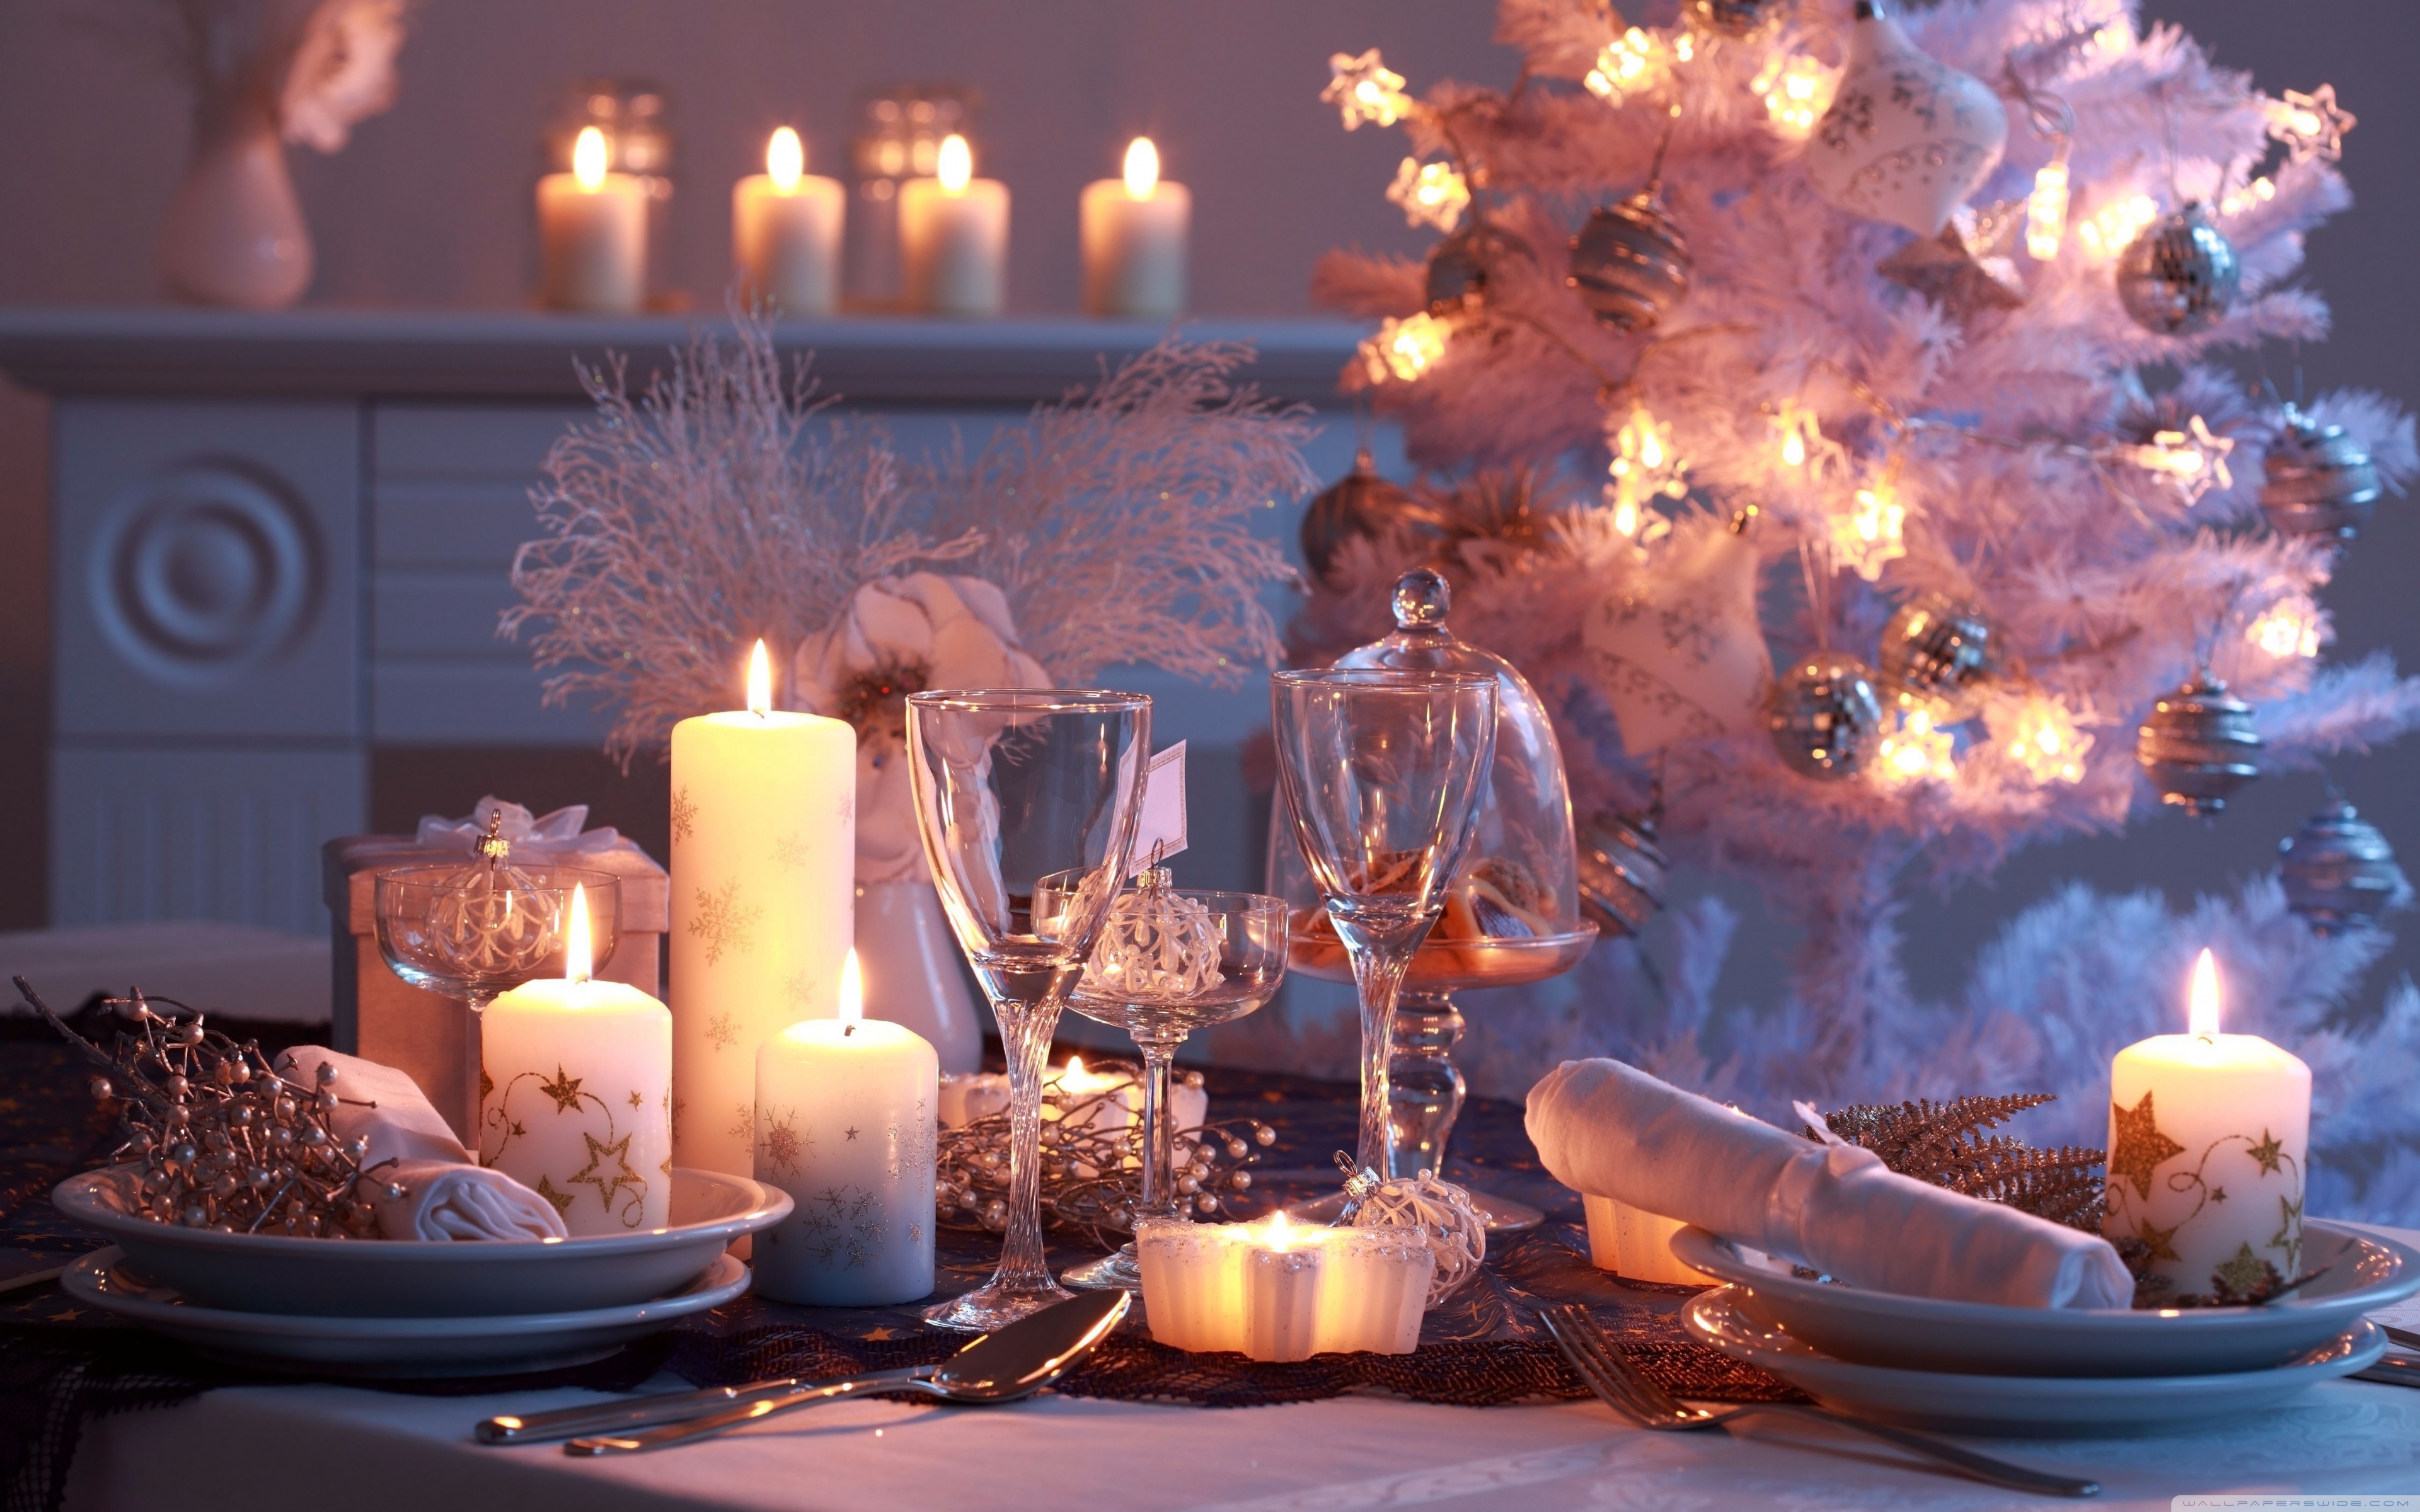 Christmas Dinner Wallpaper And Image Pictures Photos